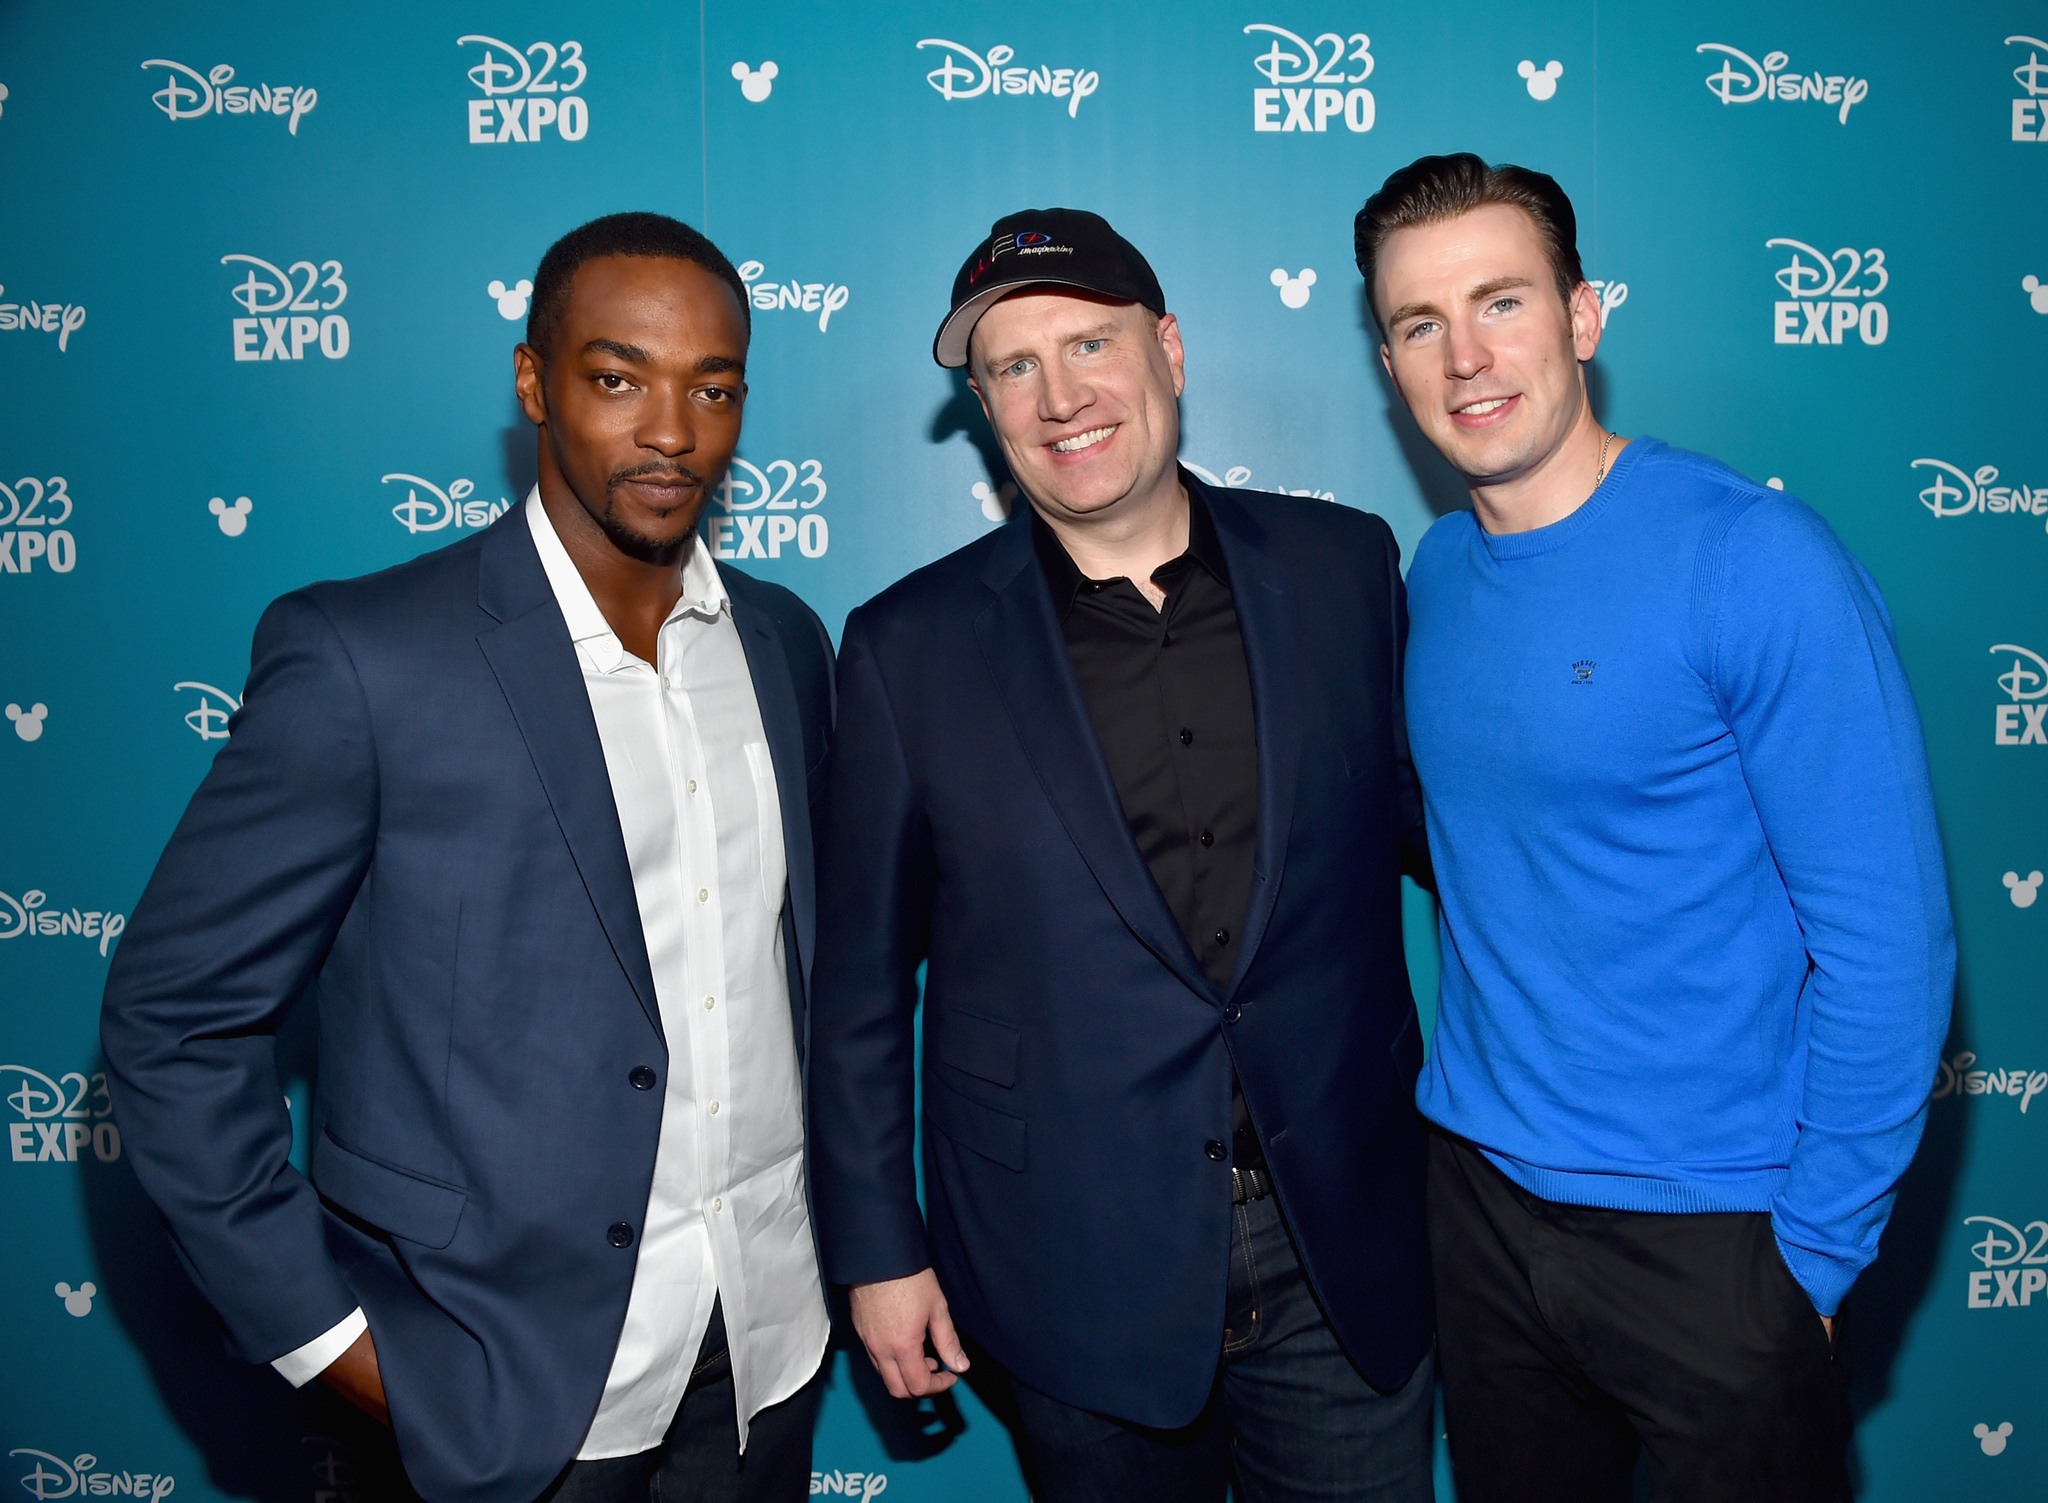 Chris Evans, Kevin Feige and Anthony Mackie